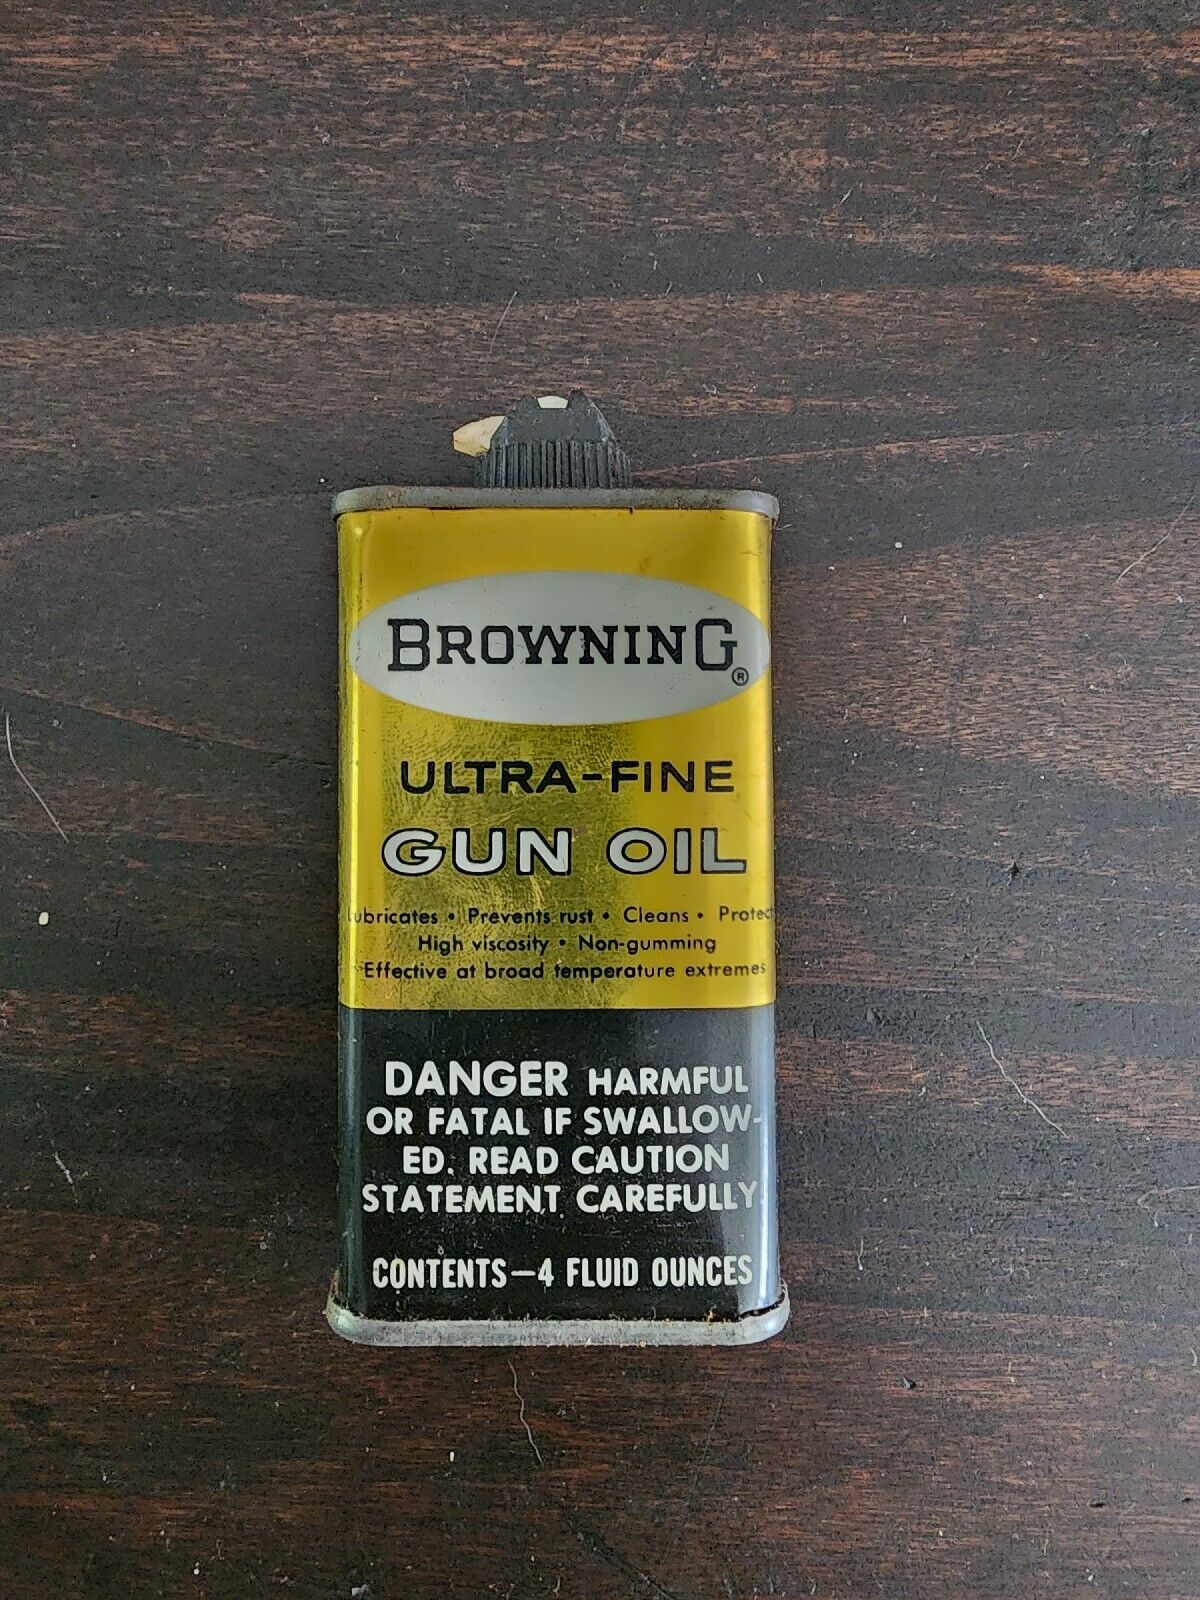 VERY NICE Vintage Browning Extra-Fine Gun Oil Can 4 oz.